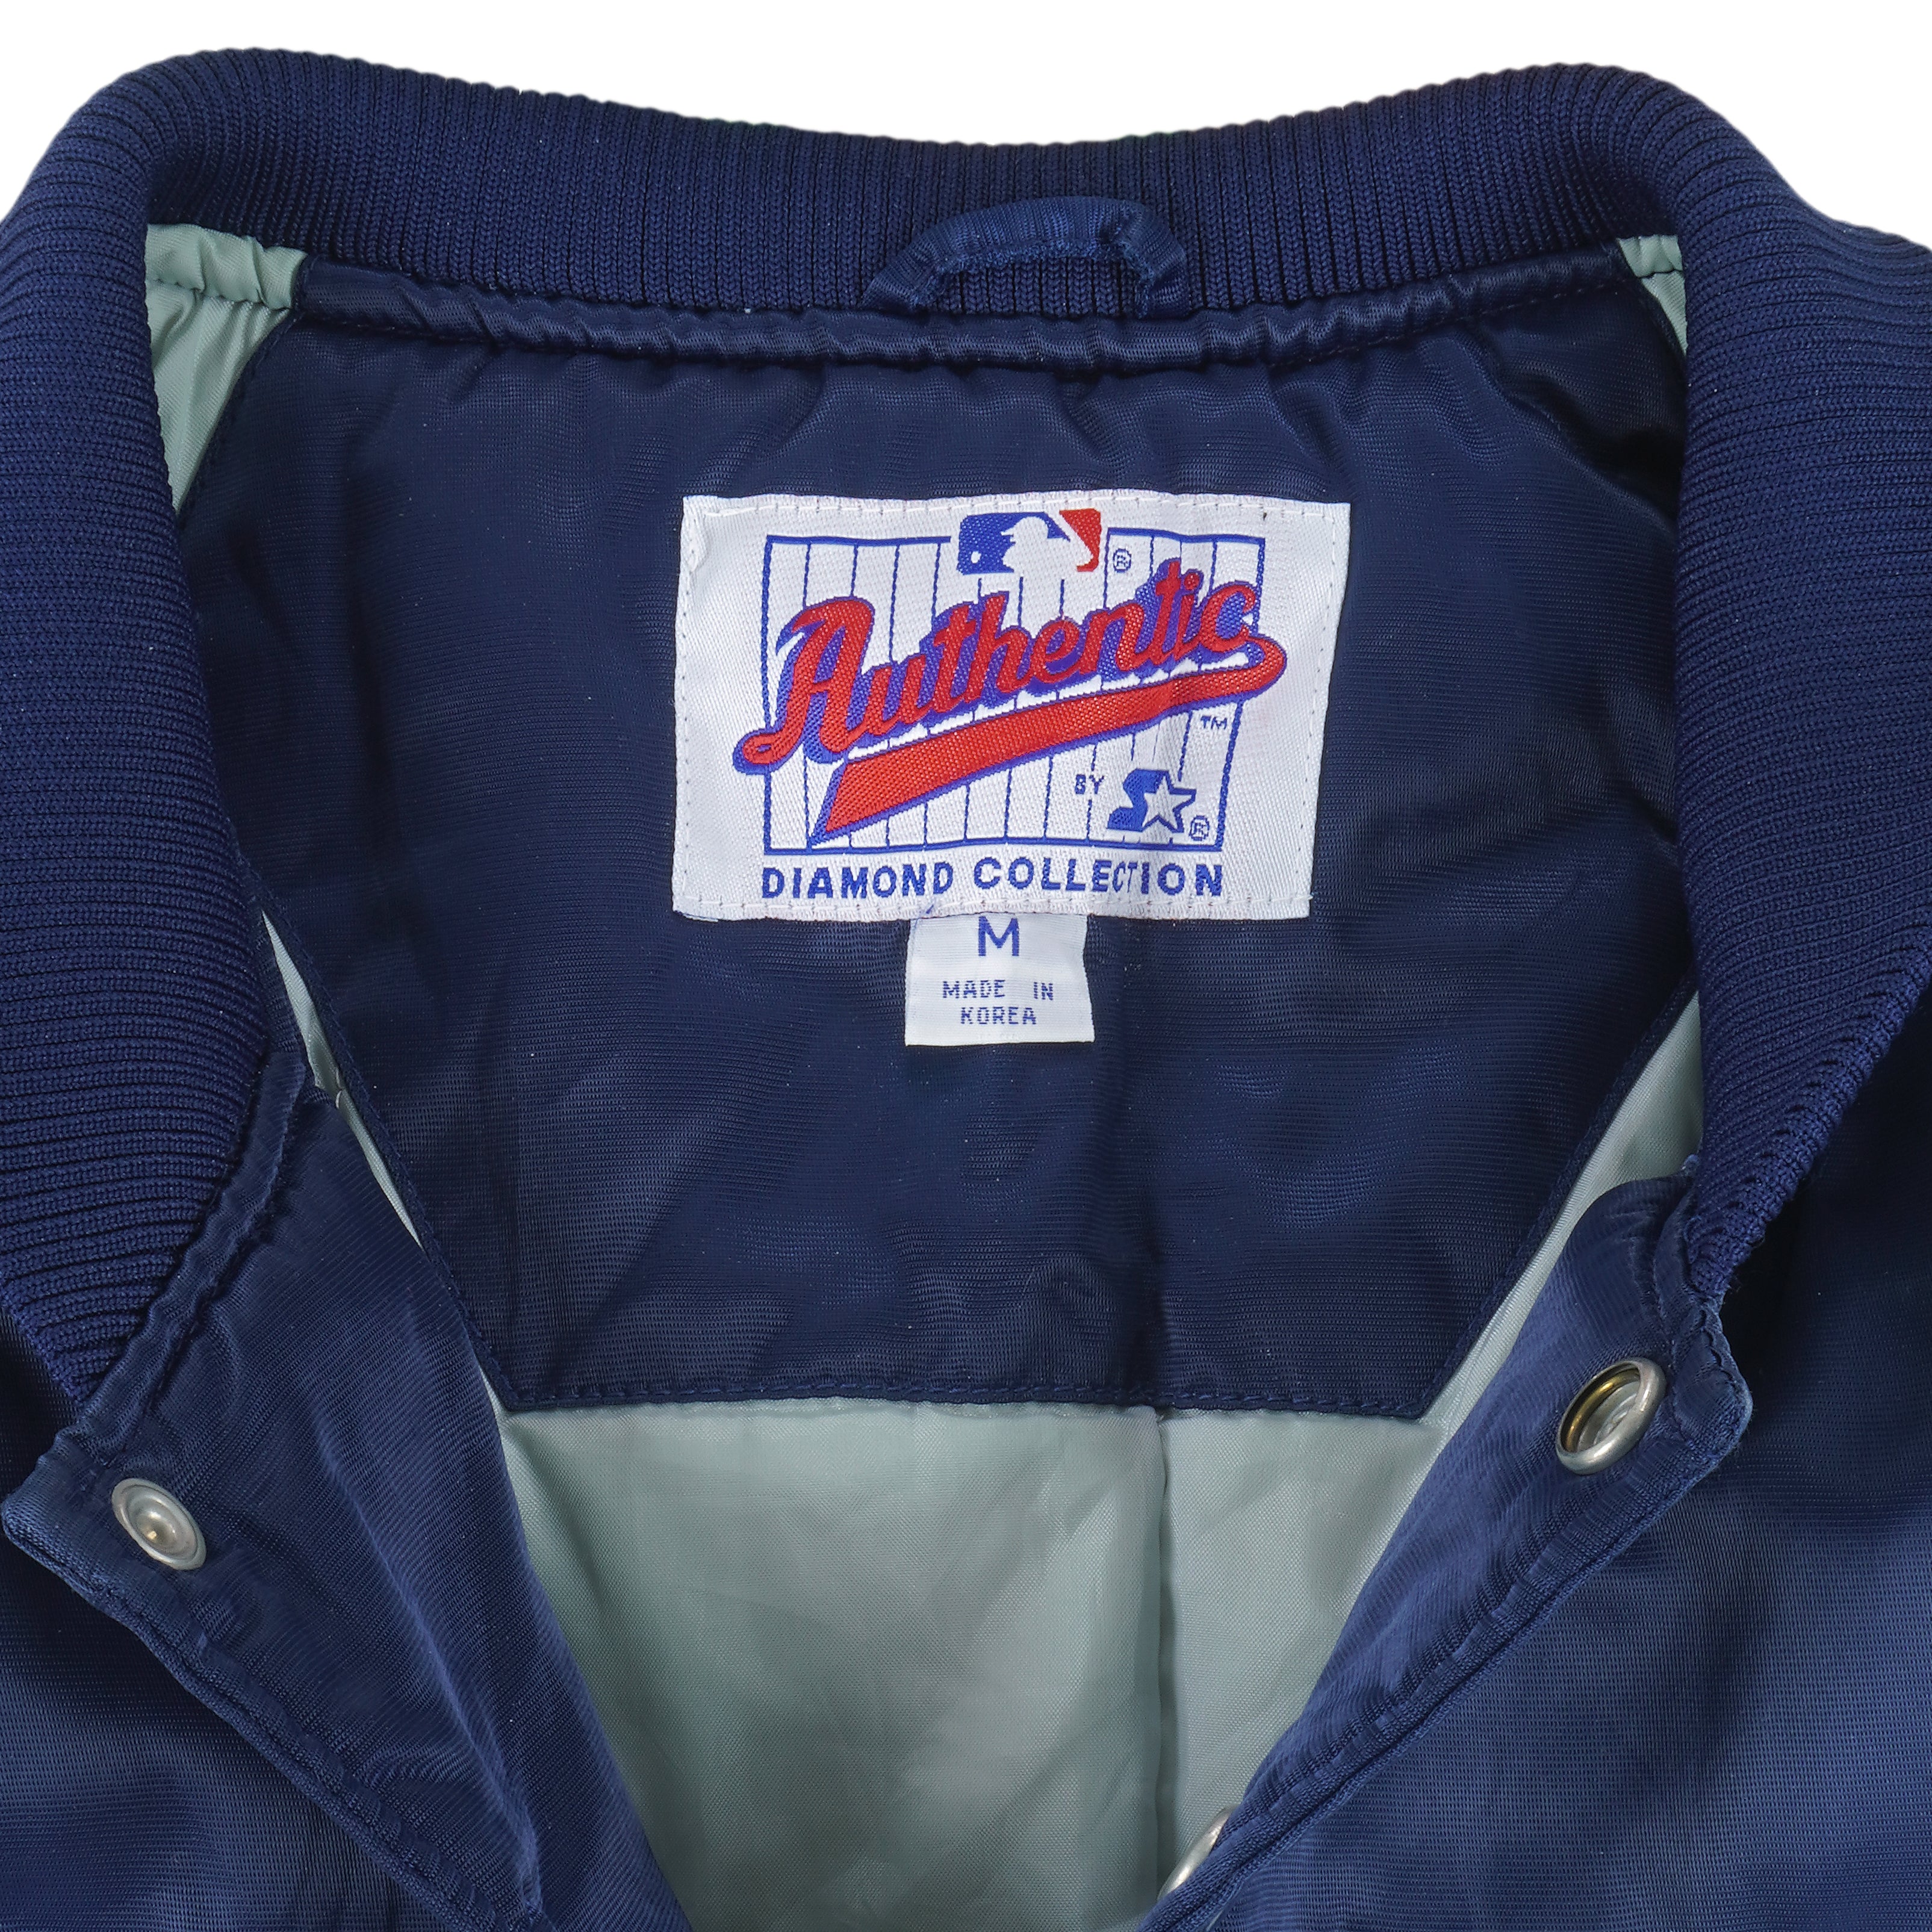 Seattle Mariners 90s vintage MLB satin bomber jacket. Made in